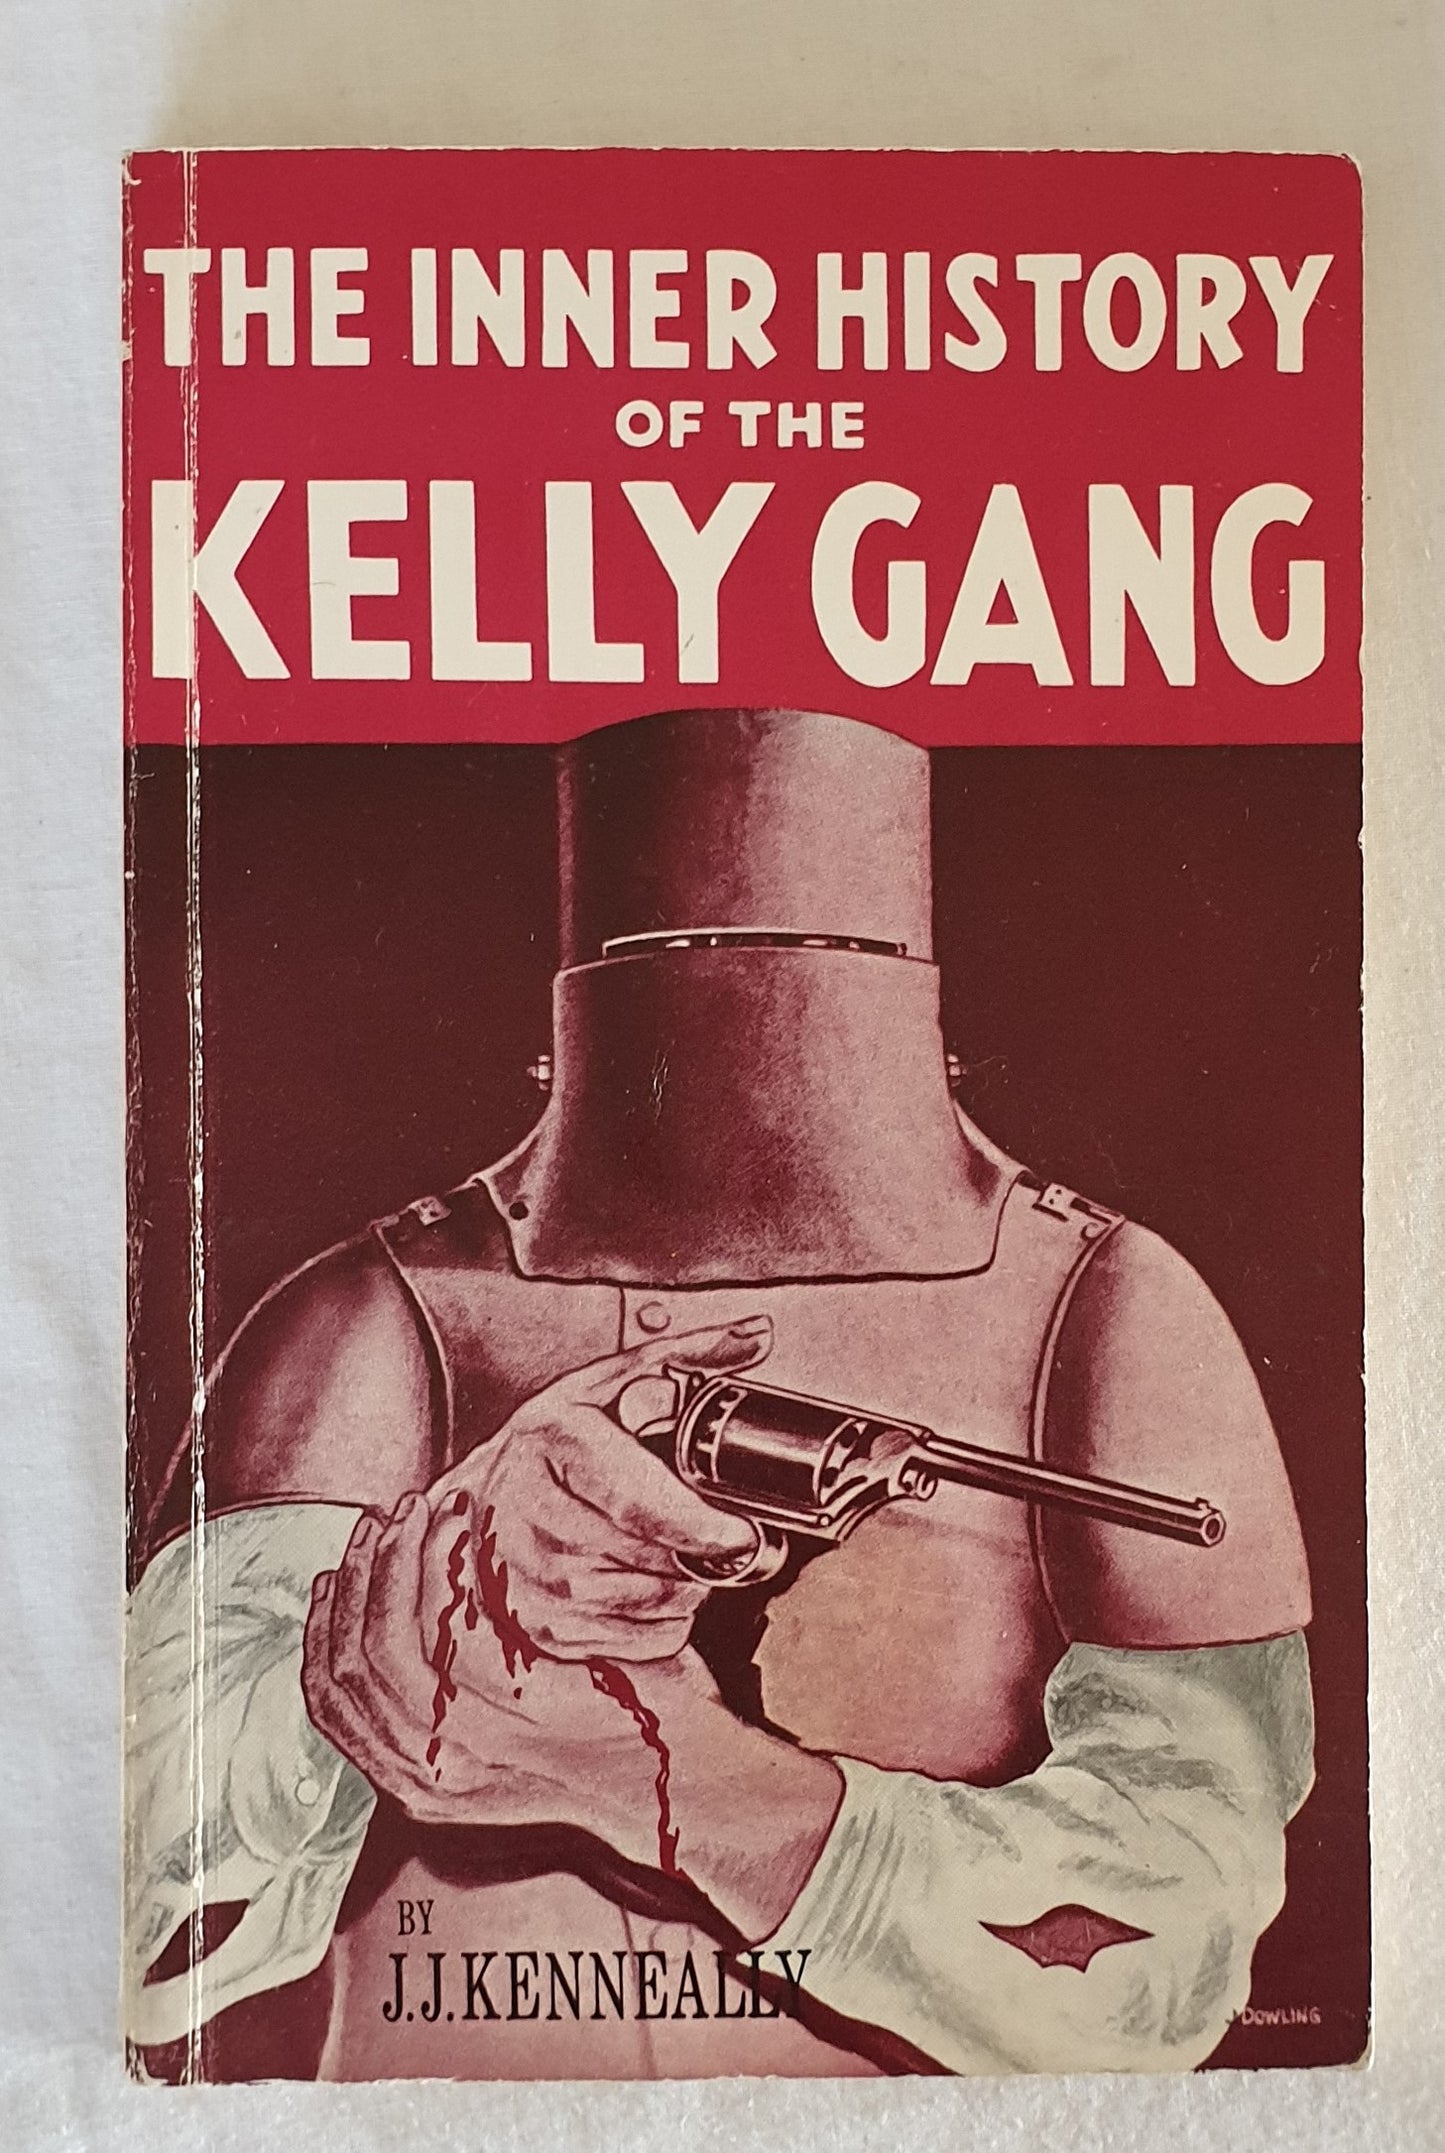 The Complete Inner History of the Kelly Gang  and Their Pursuers  by J. J. Kenneally